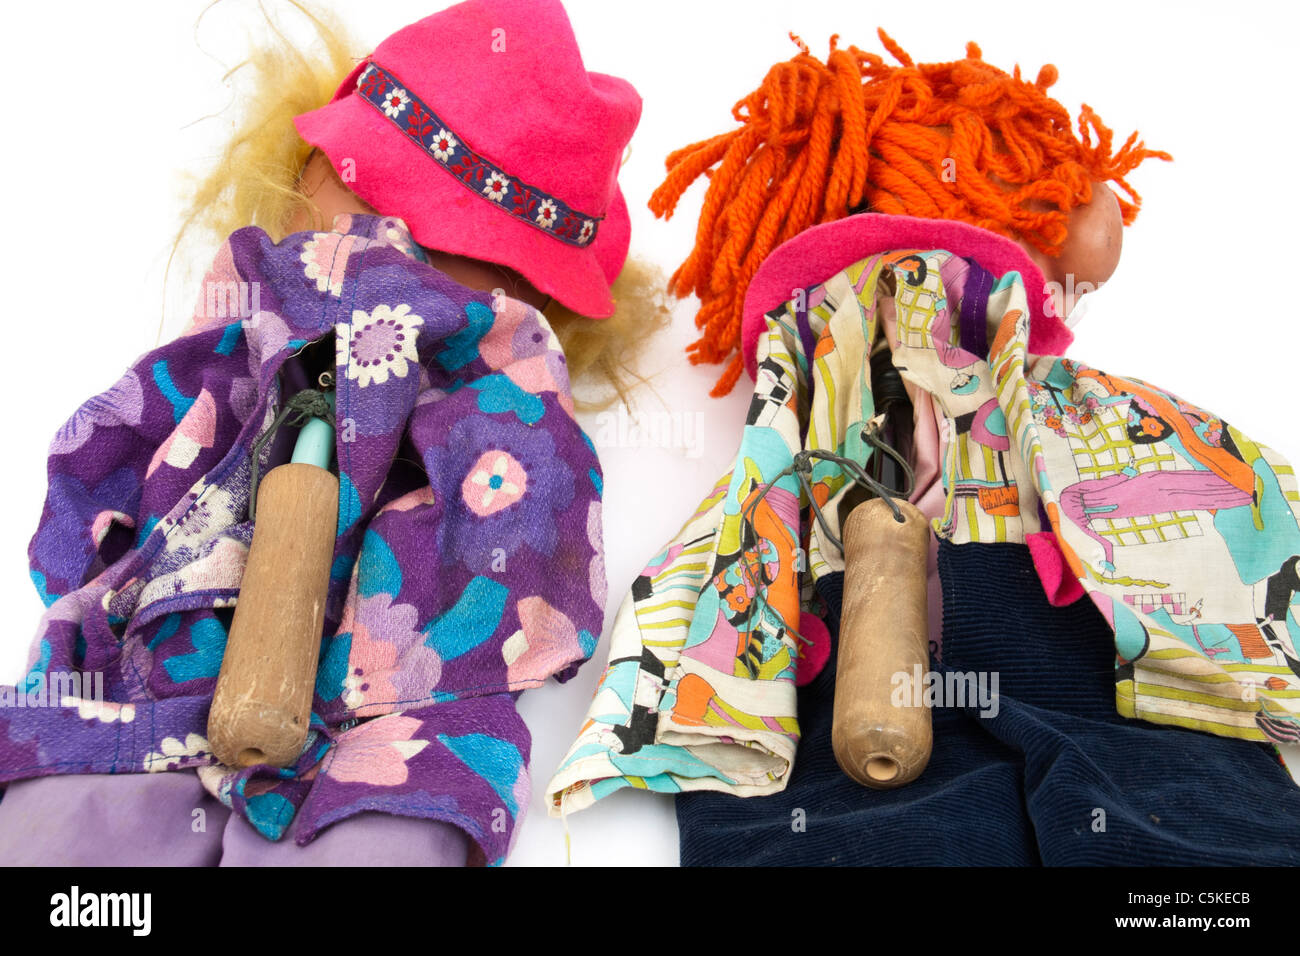 Rear view of vintage hand puppets / ventriloquist dolls Stock Photo